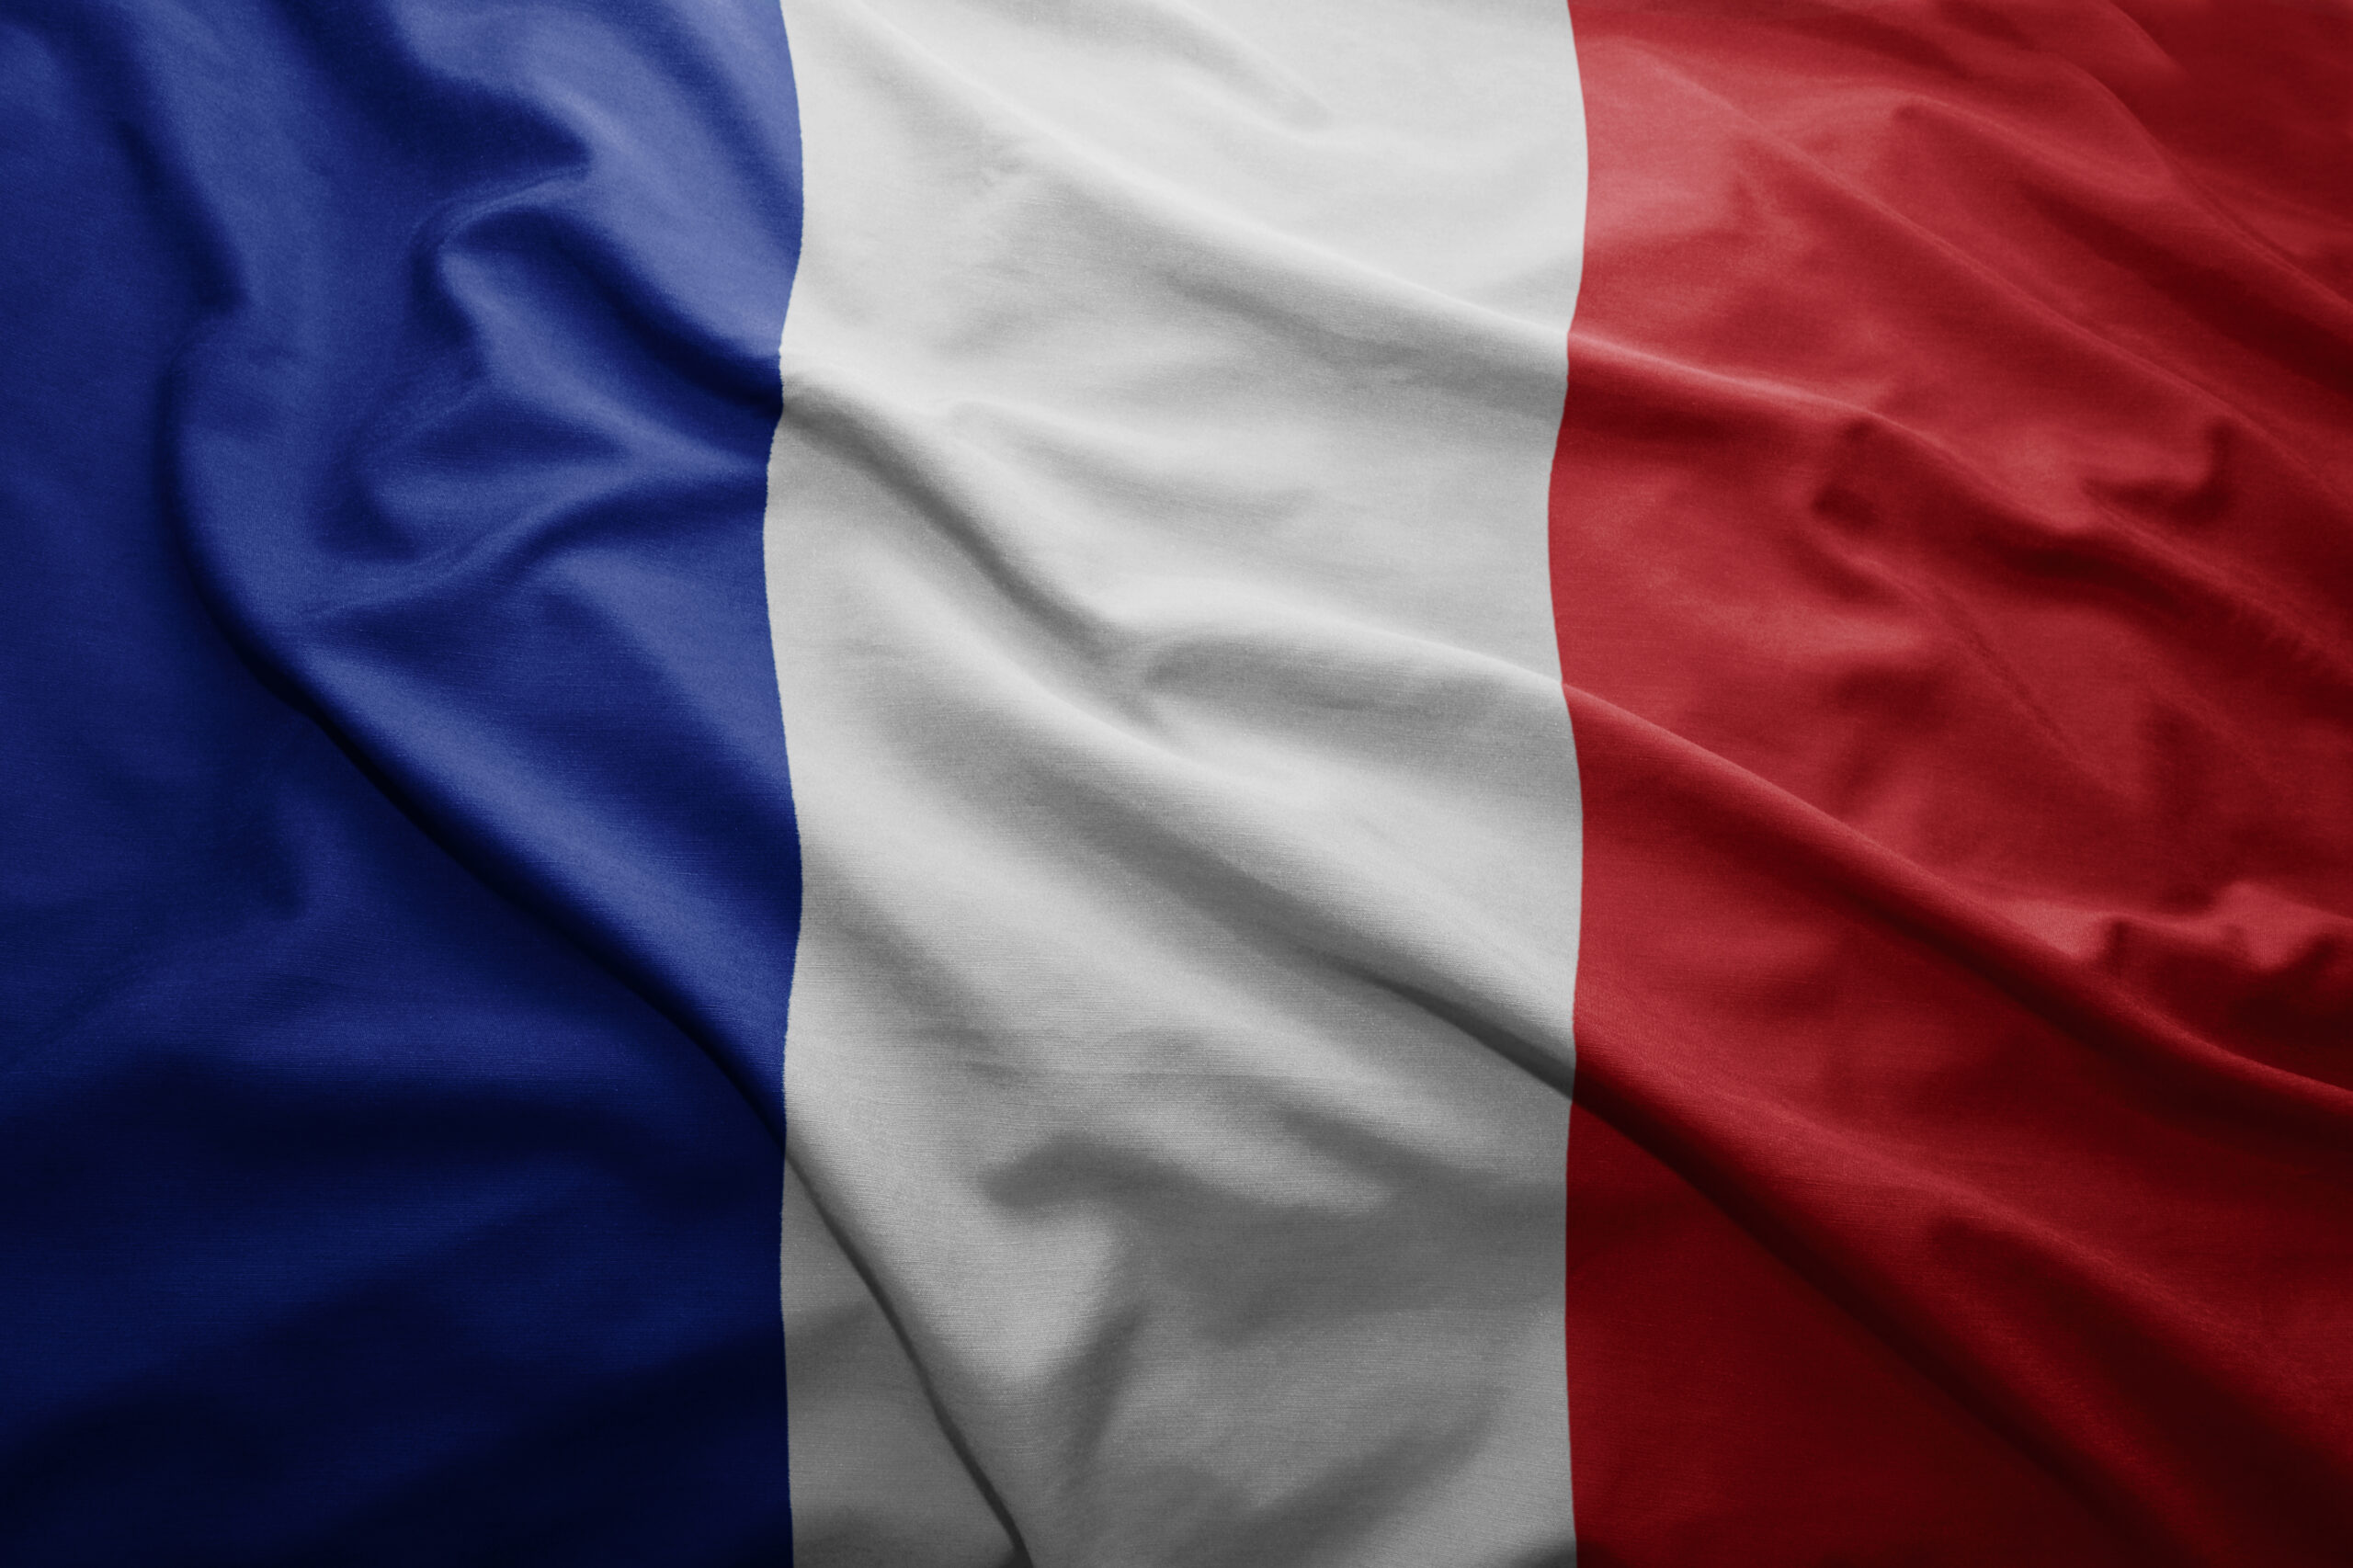 Lilium is in talks with the French Government to establish a production site in France © Lilium